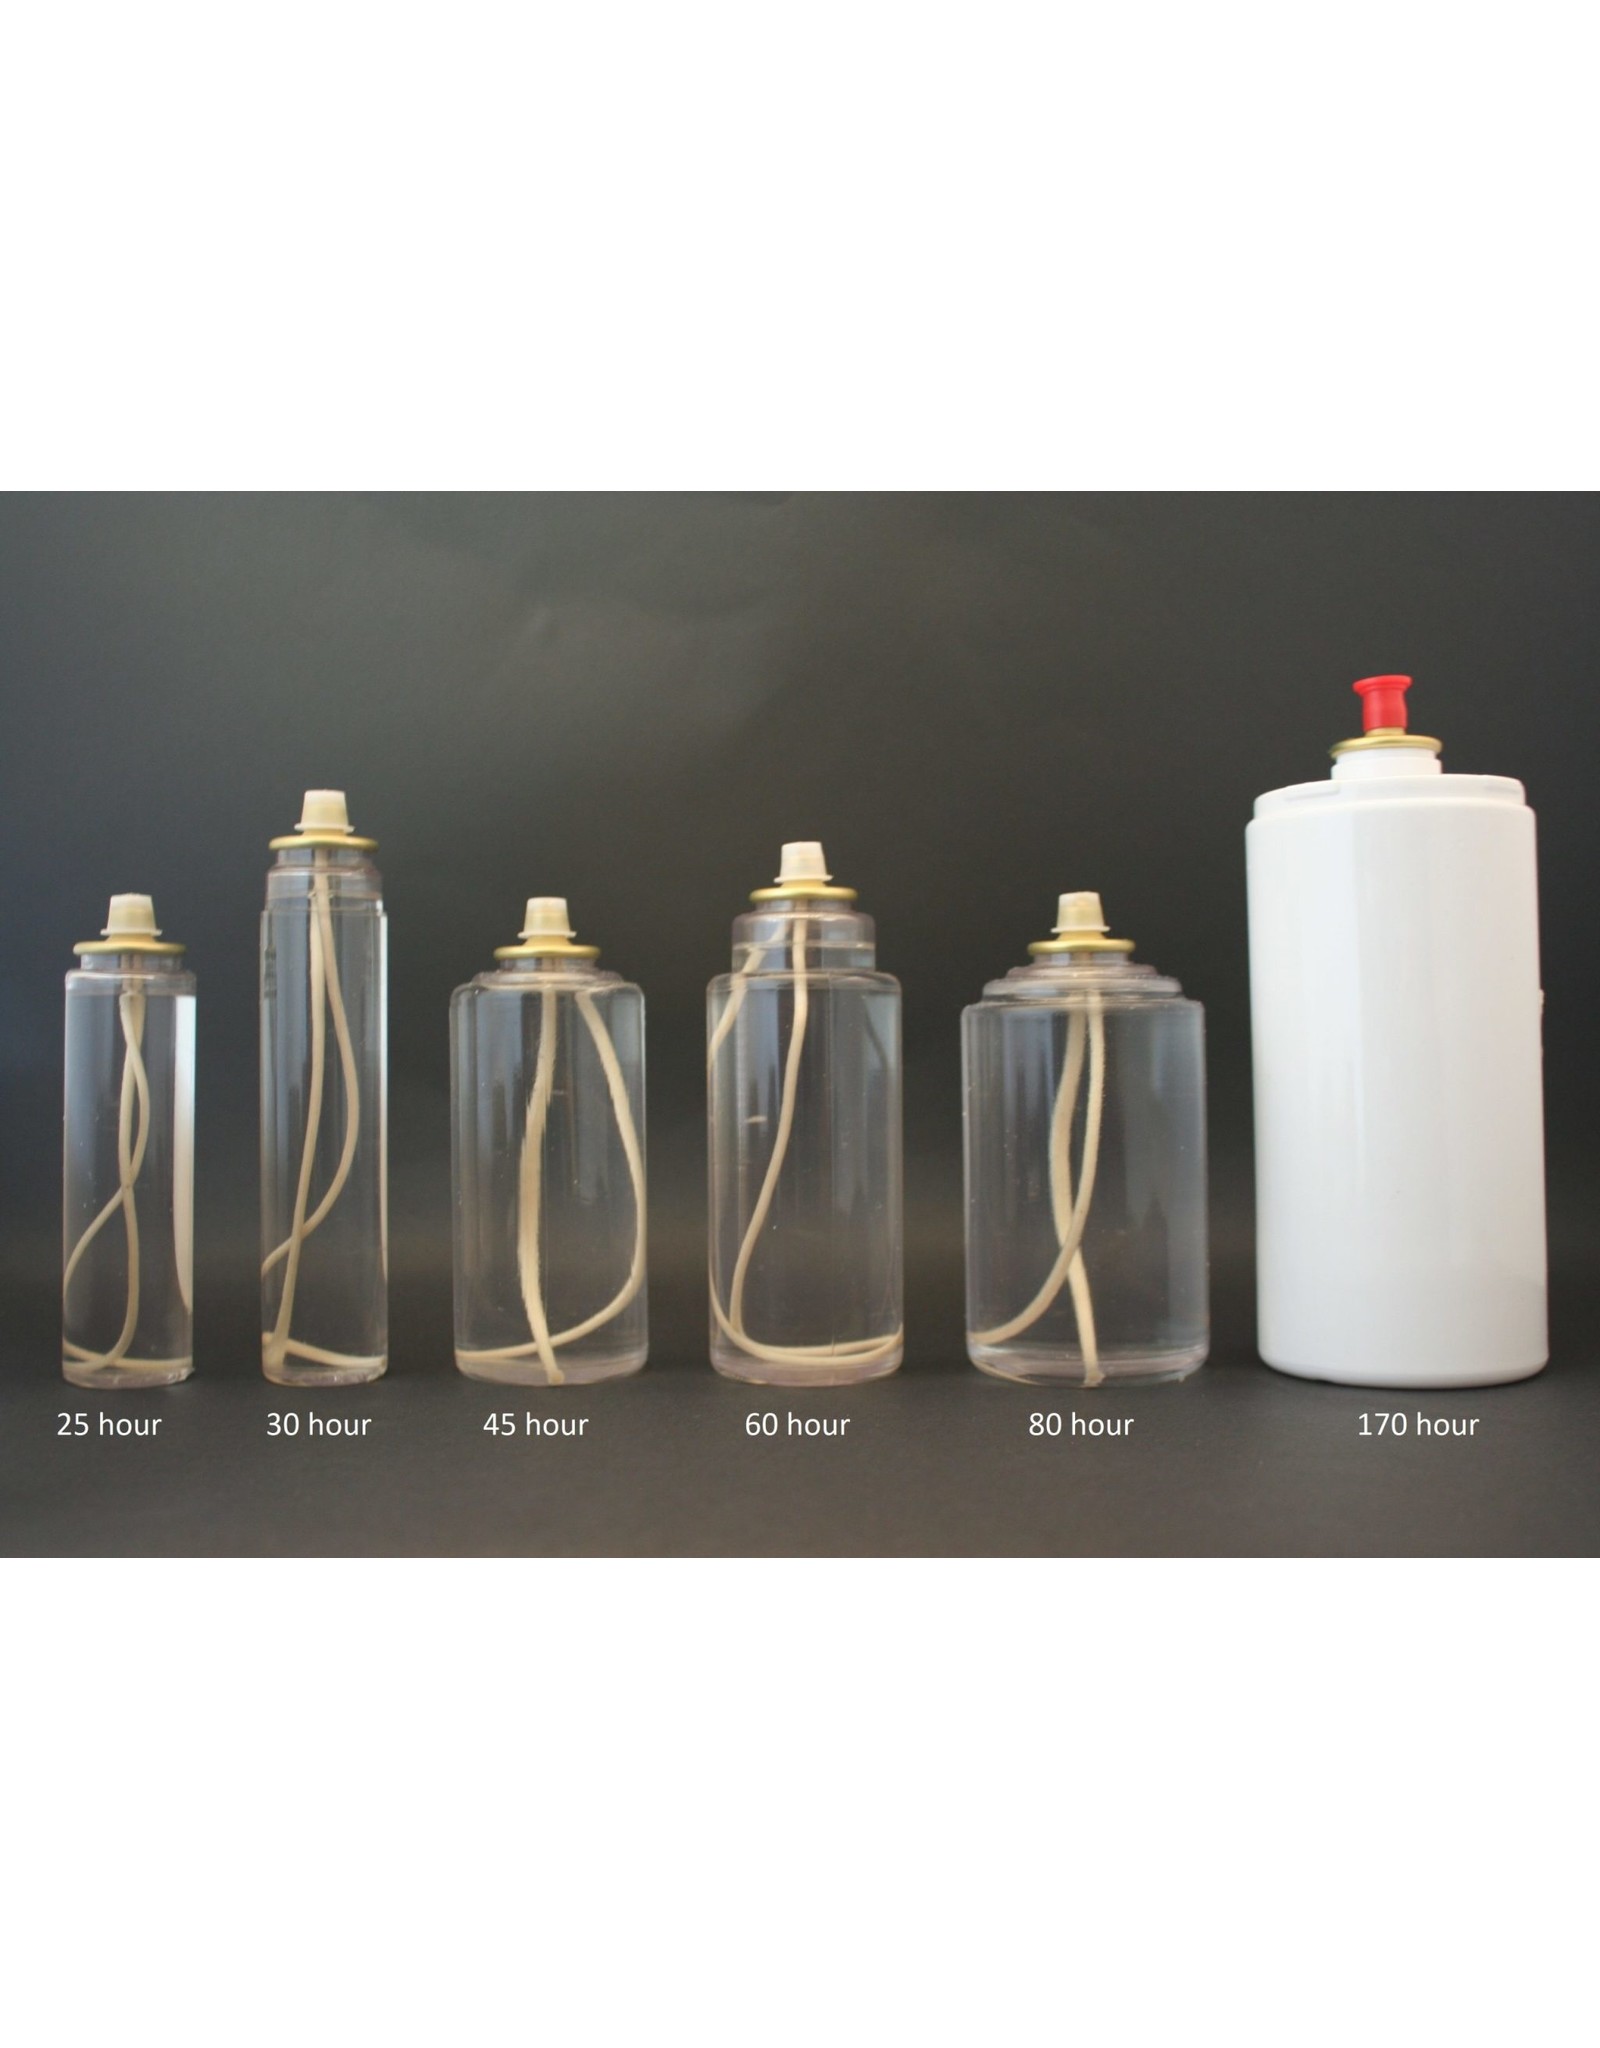 Lux Mundi Disposable Oil Containers 25-hr (36) (Clear)